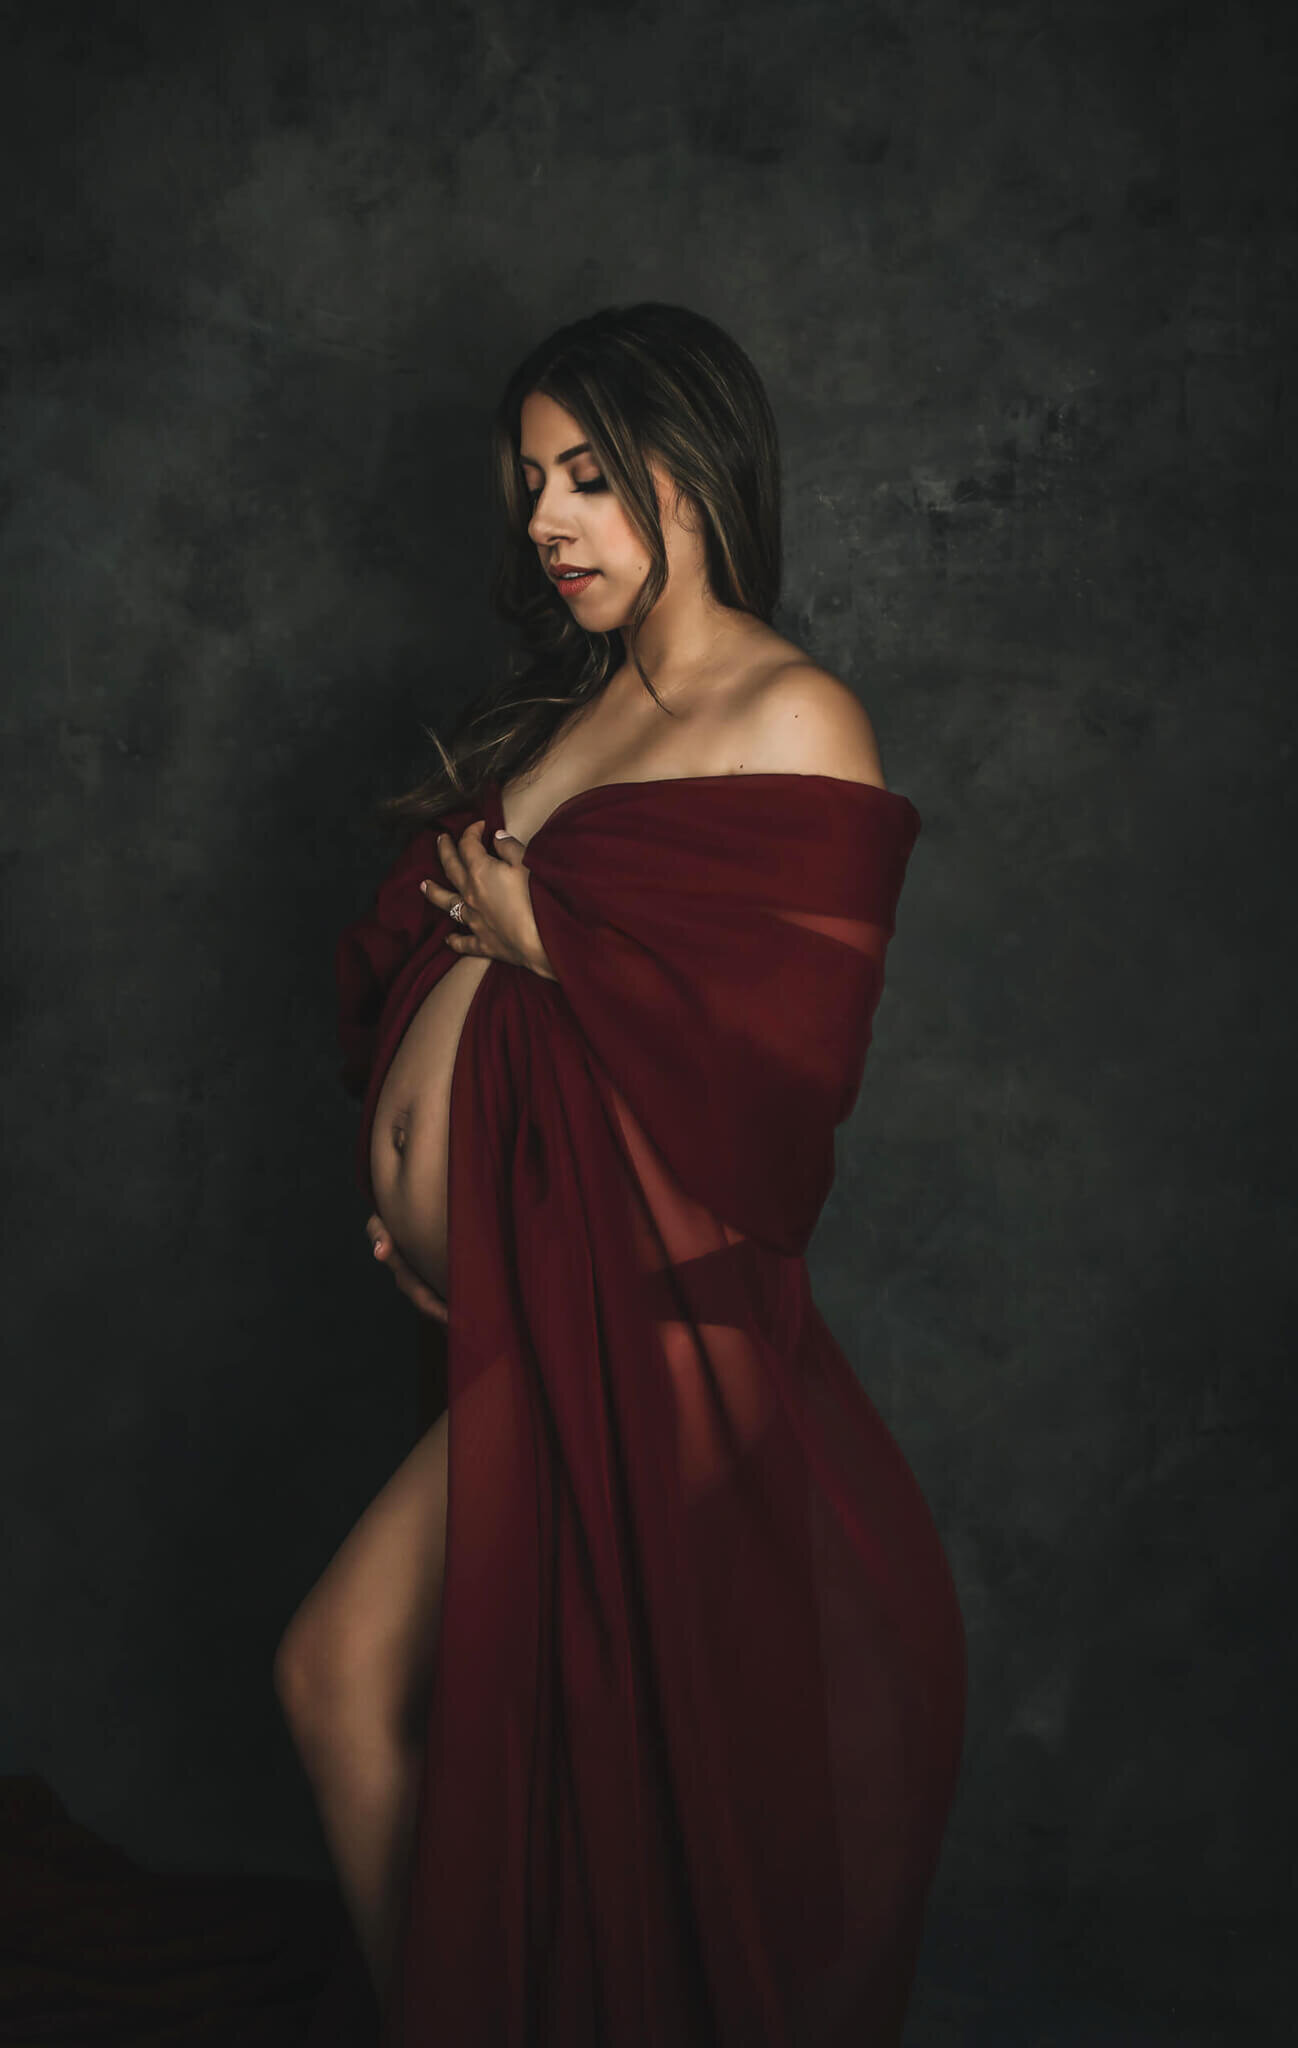 Portrait in color of a maternity photoshoot where the mom to be is wearing a red dress